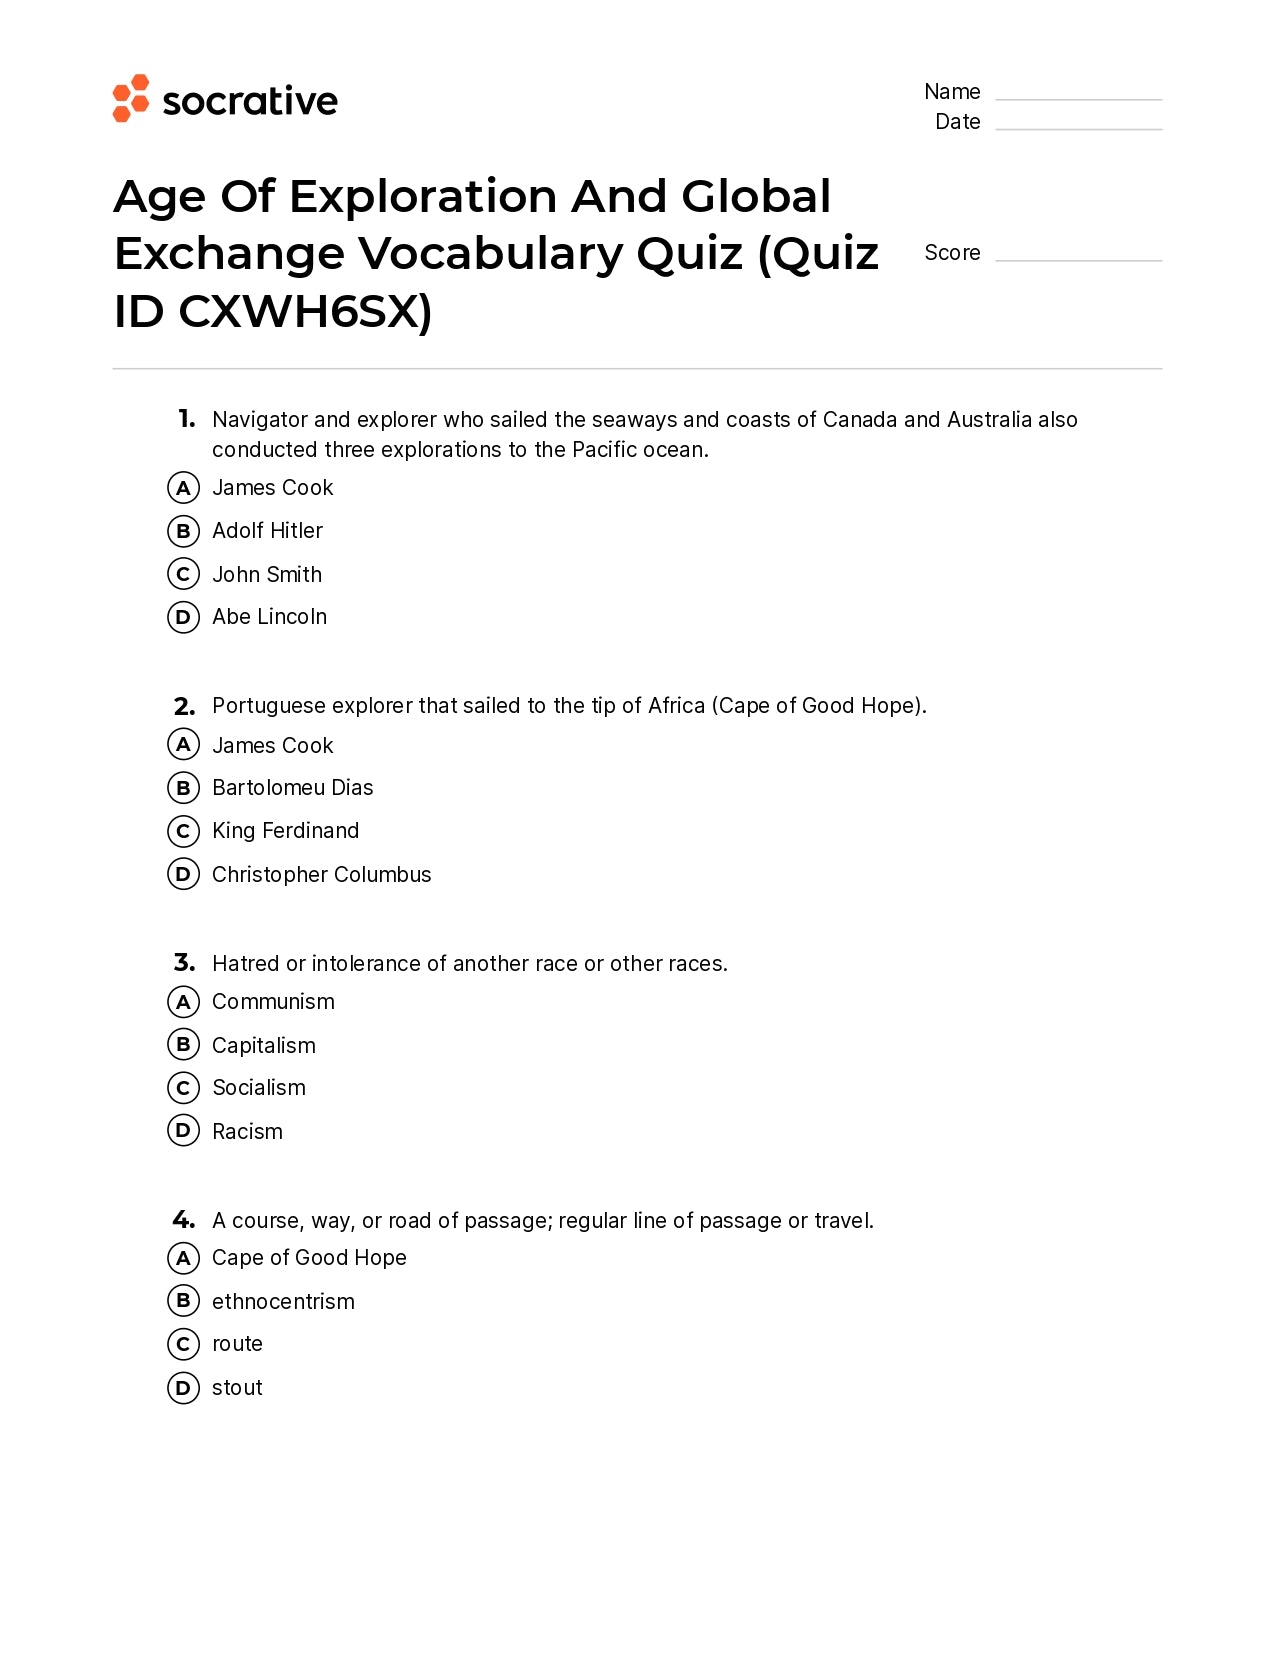 Age Of Exploration And Global Exchange Vocabulary Quiz